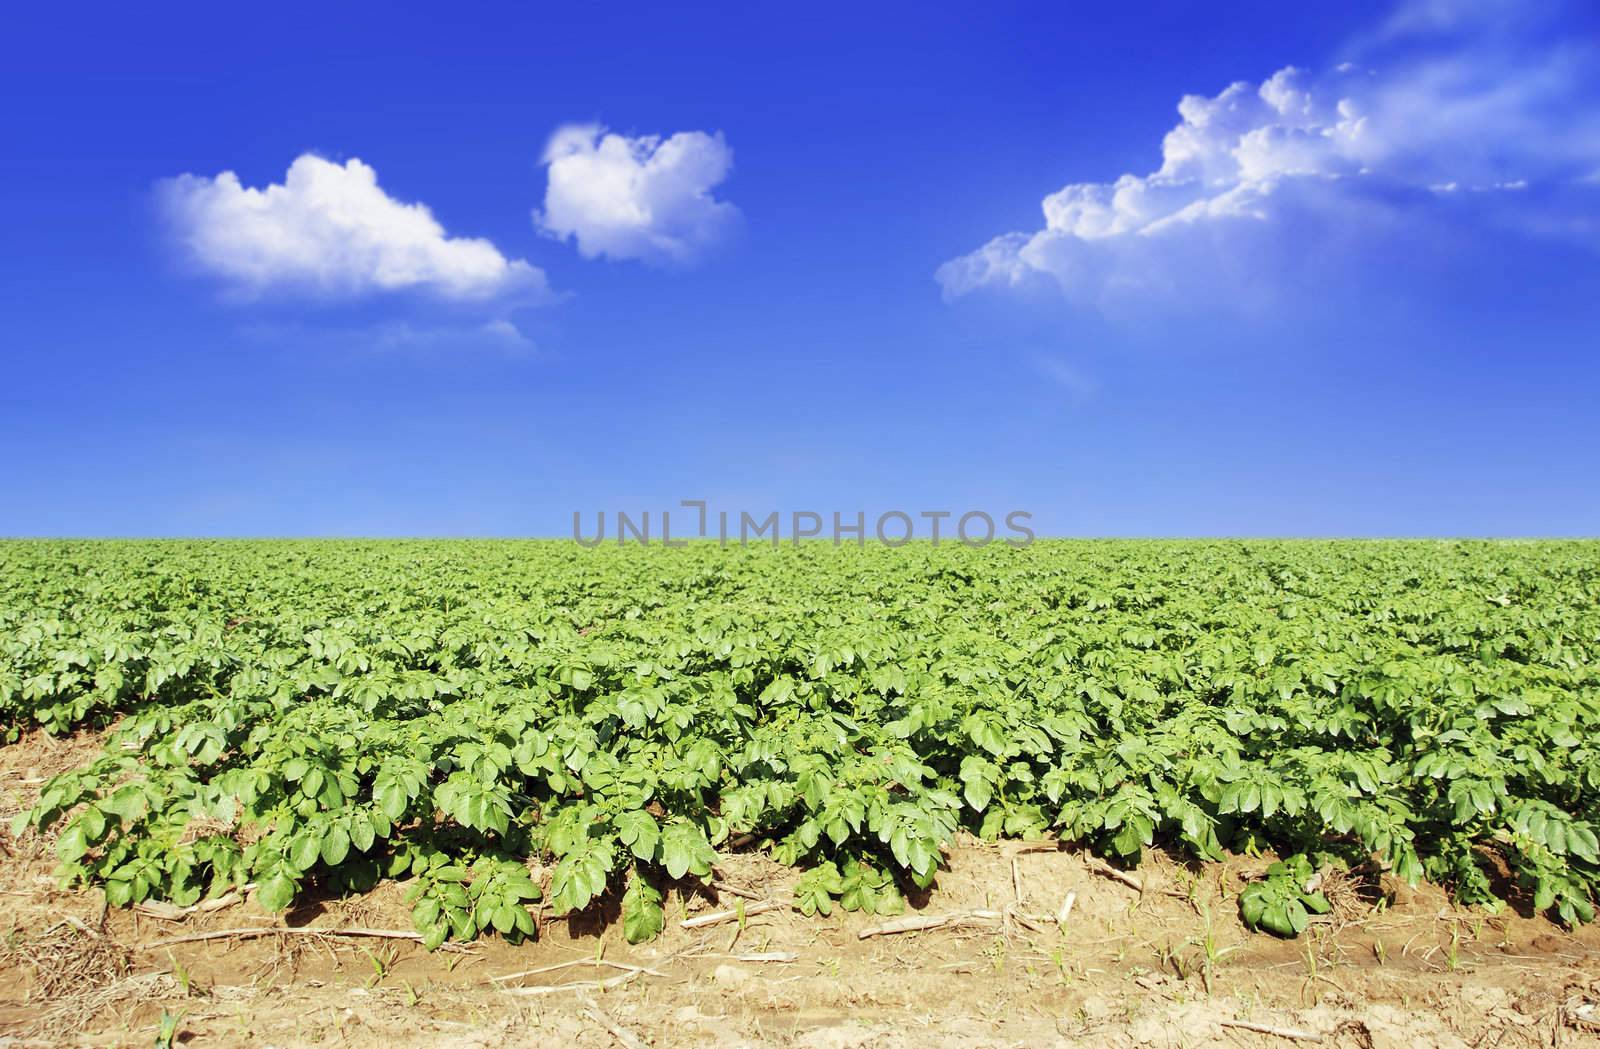 Potato field against blue sky and clouds by tish1